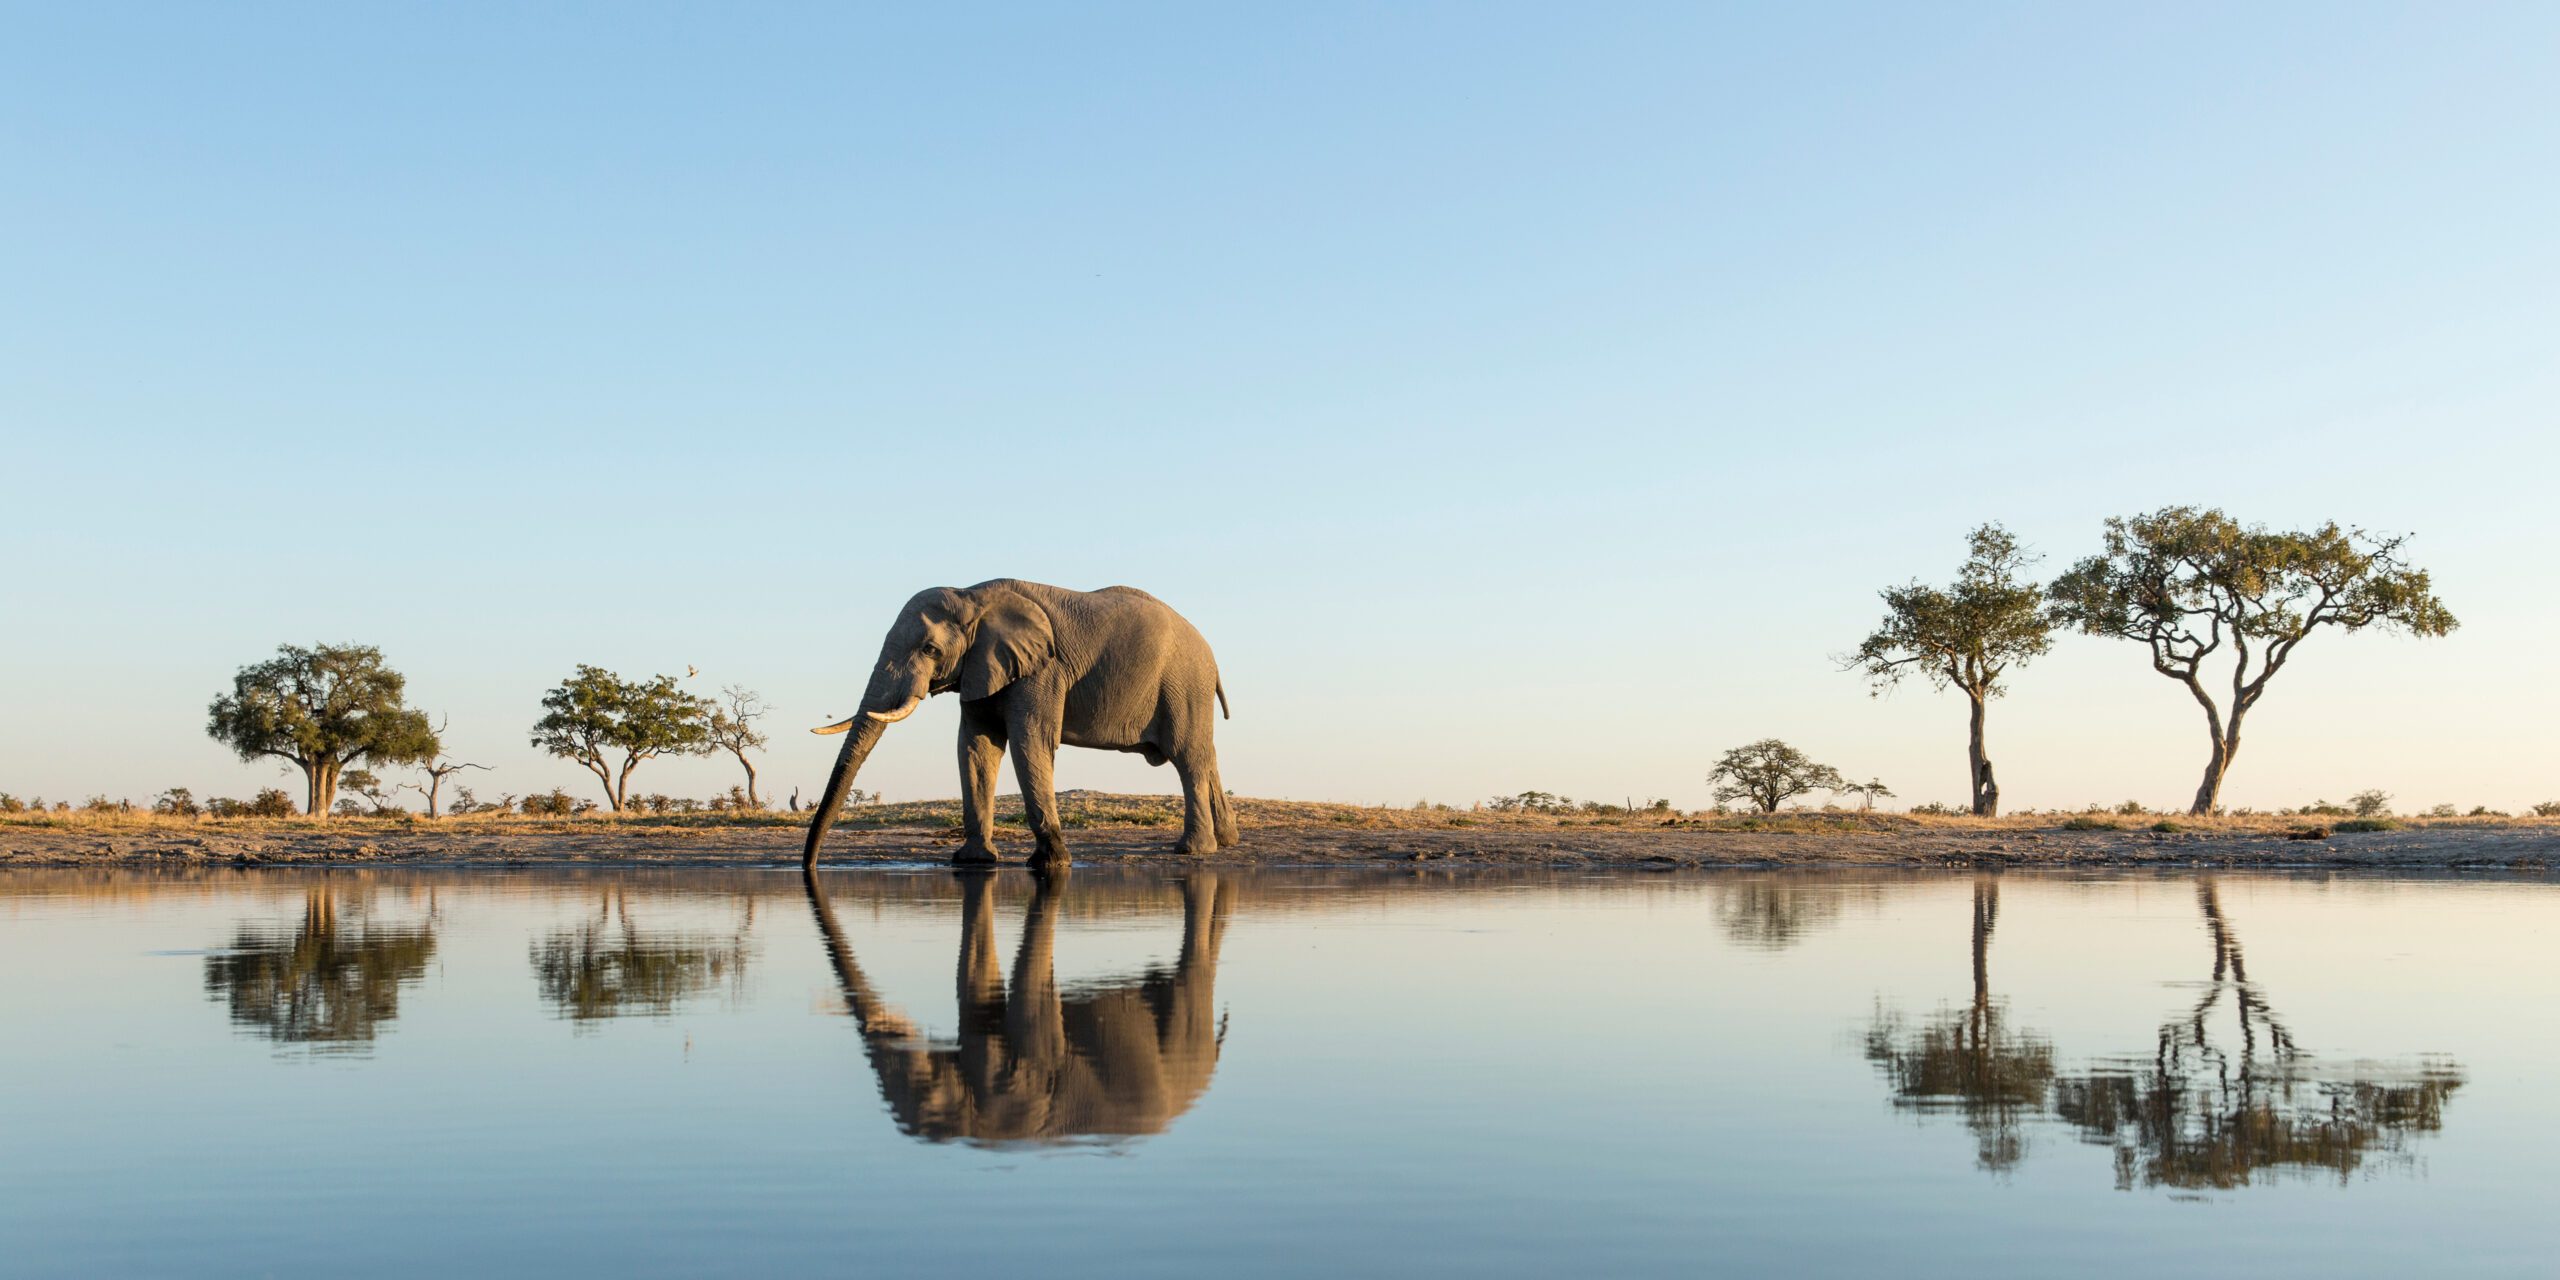 An elephant standing in the middle of a body of water.